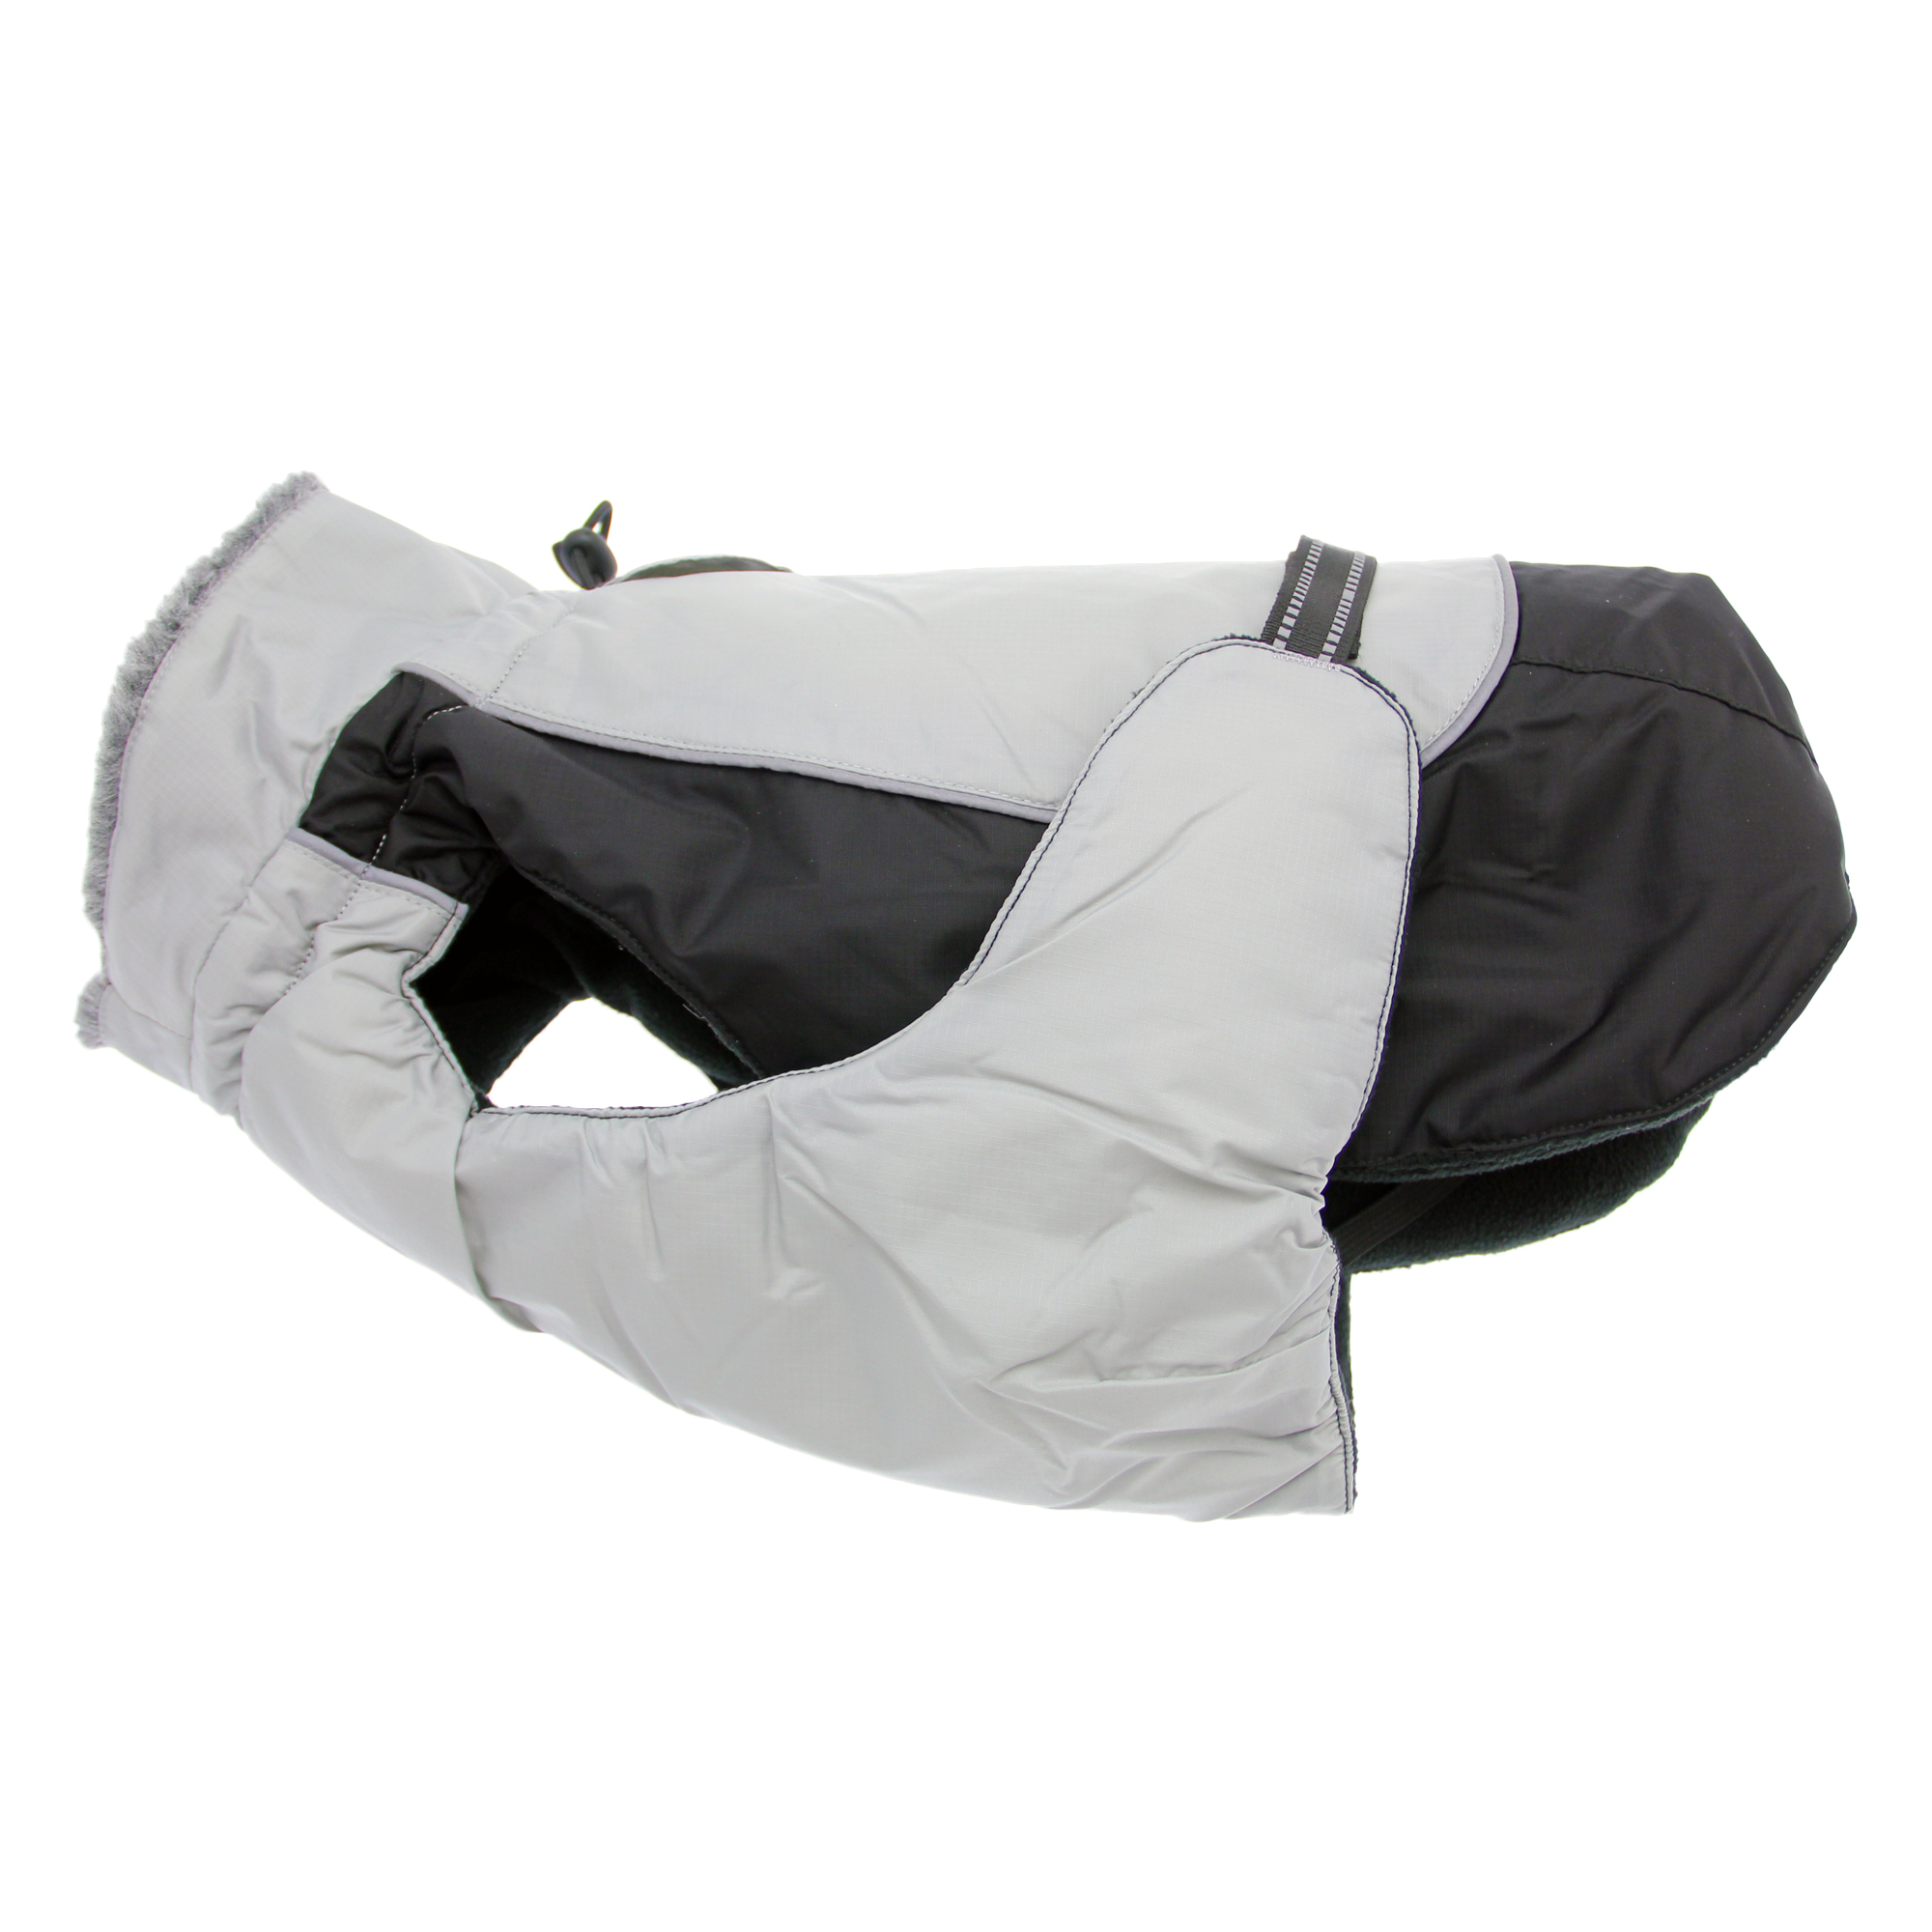 Alpine All-Weather Dog Coat by Doggie Design - Black and Gray